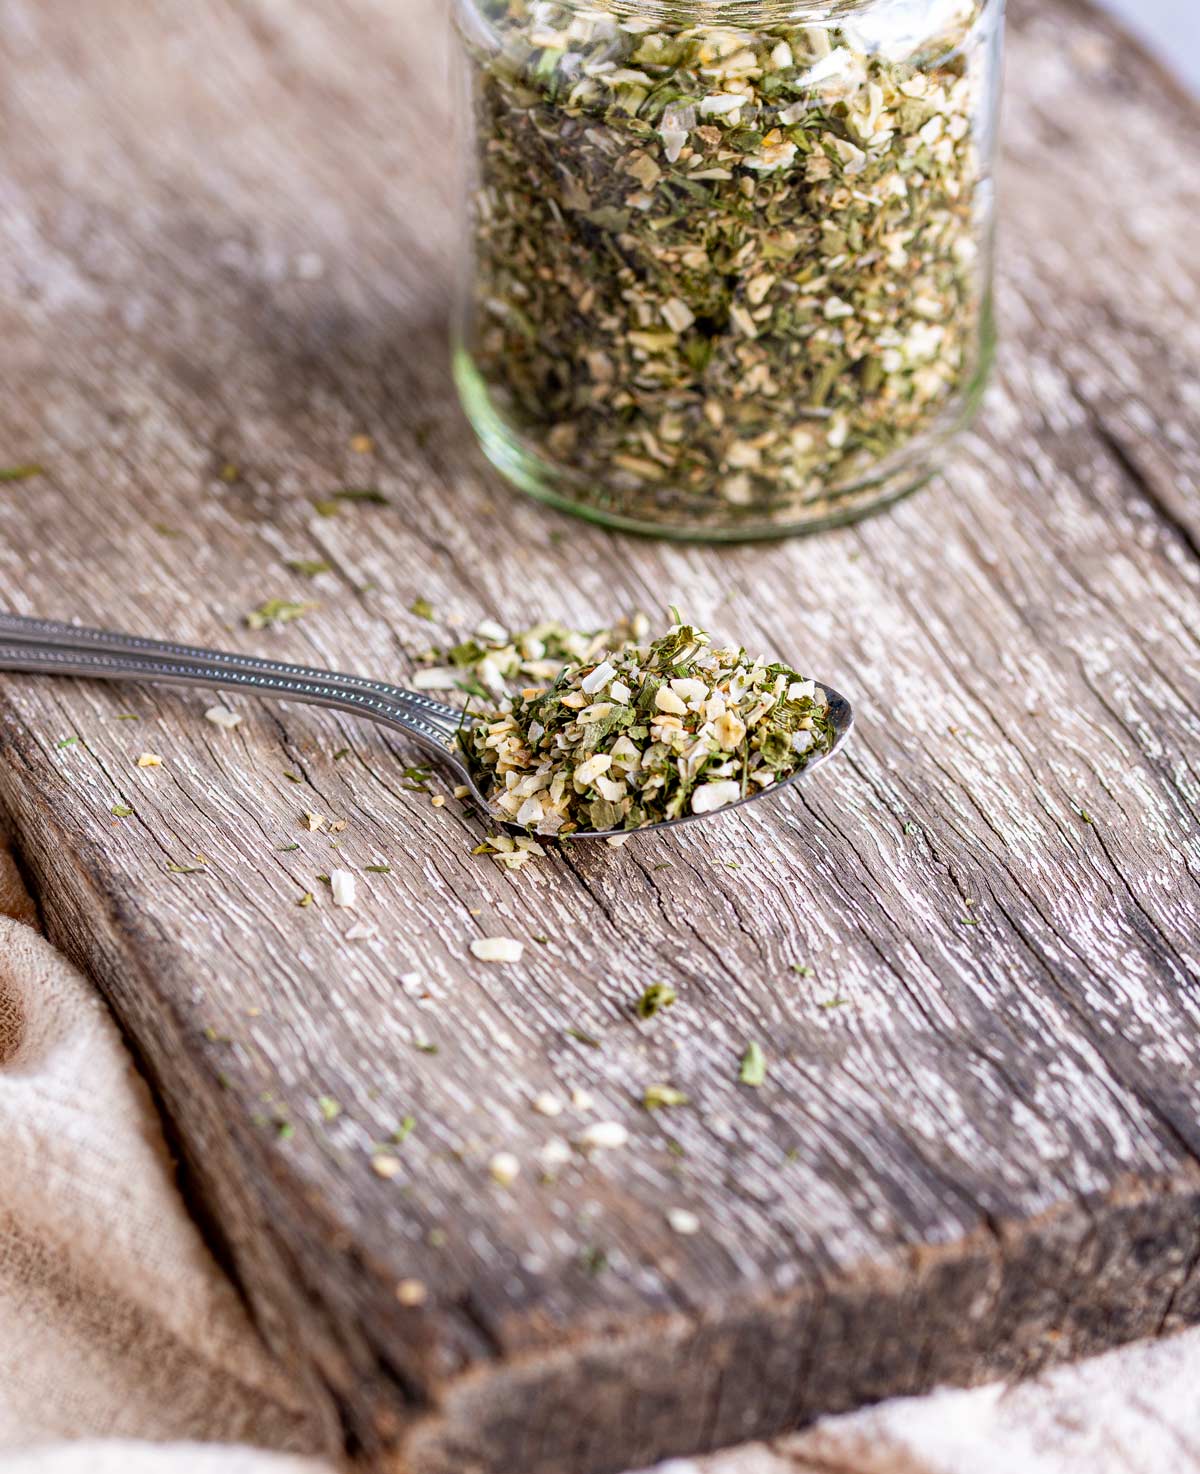 a spoon with herbs on it, on a wooden board with a jar in the background